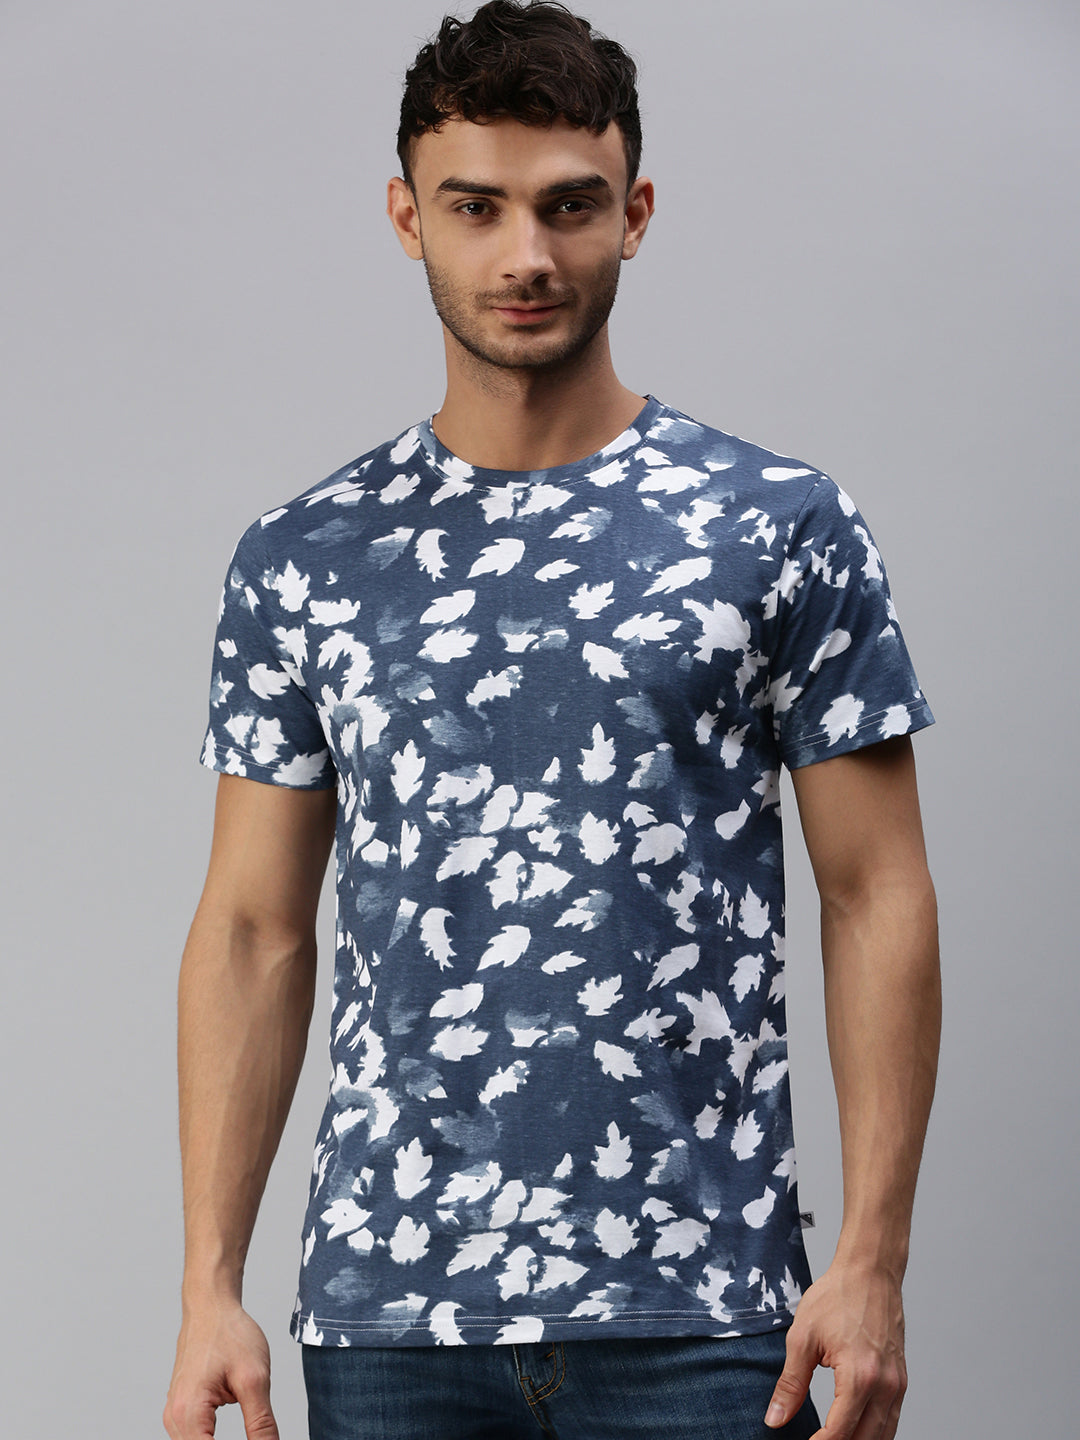 Graphic Printed Round Neck Casual T-Shirt with Pocket Navy GT24